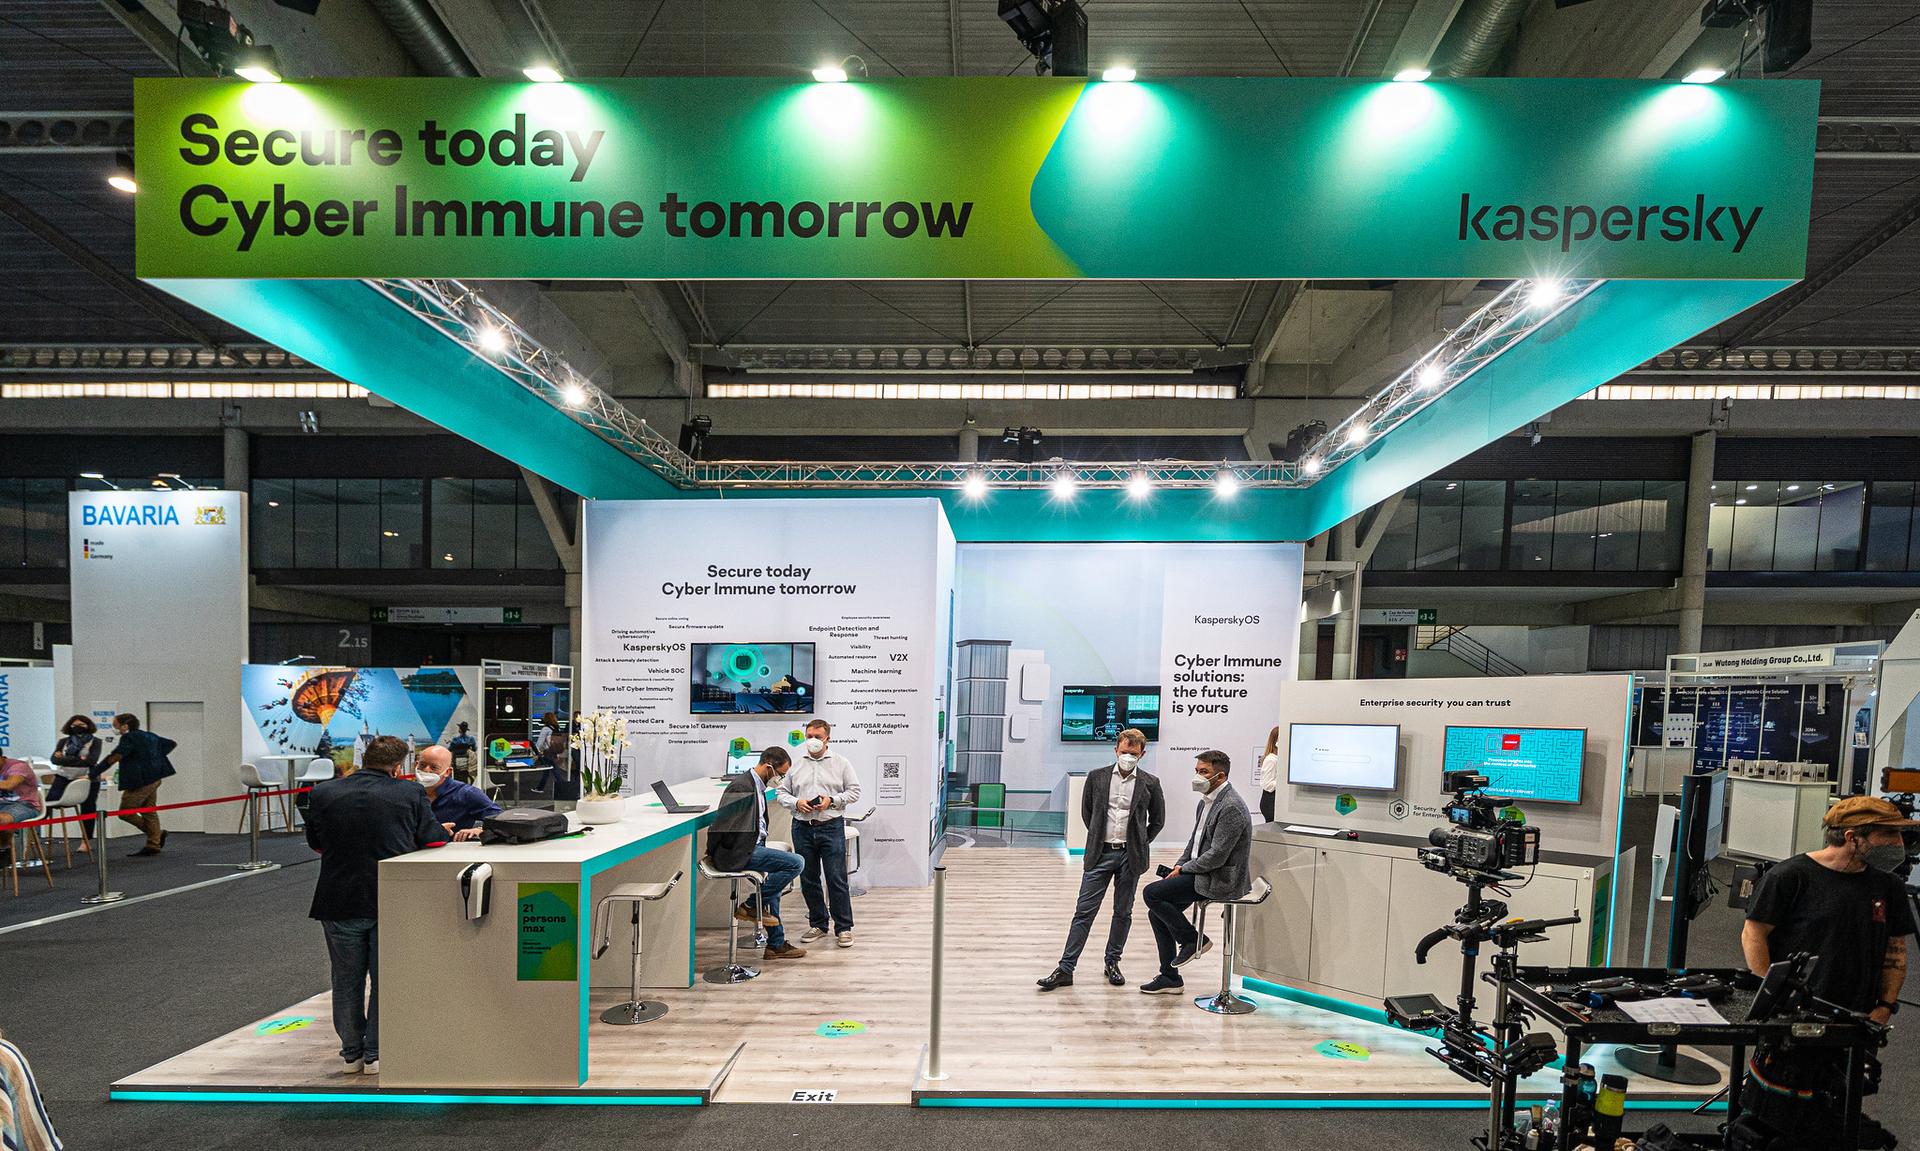 The Kaspersky booth is seen on June 28, 2021, at Mobile World Congress in Barcelona. (Eugene Kaspersky, CC BY-NC-SA 2.0)